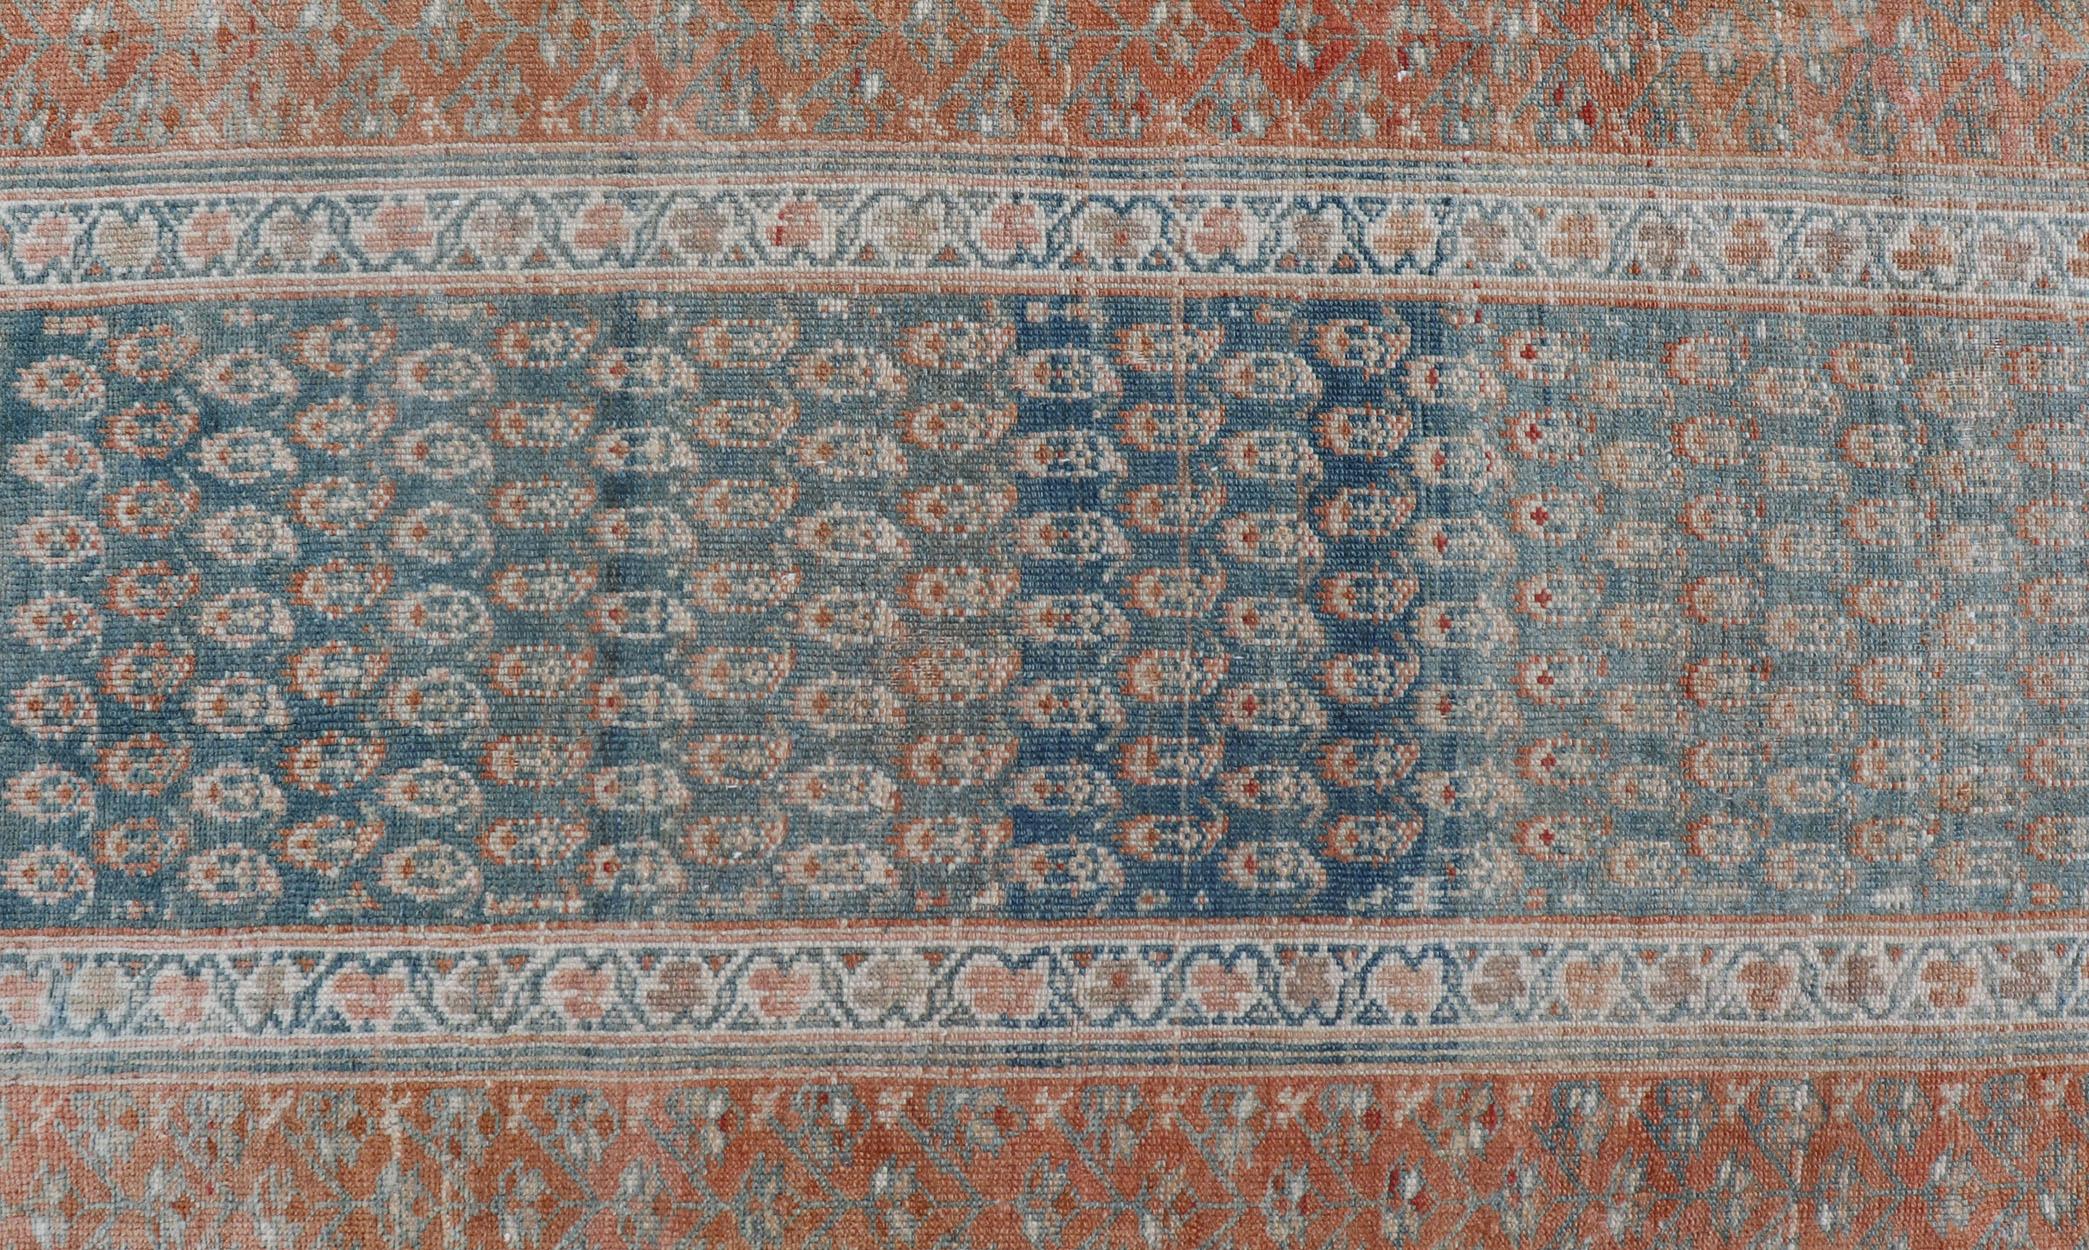 Hand-Knotted Paisley Field Antique Persian Kurdish Runner in Soft Teal Colors & Orange For Sale